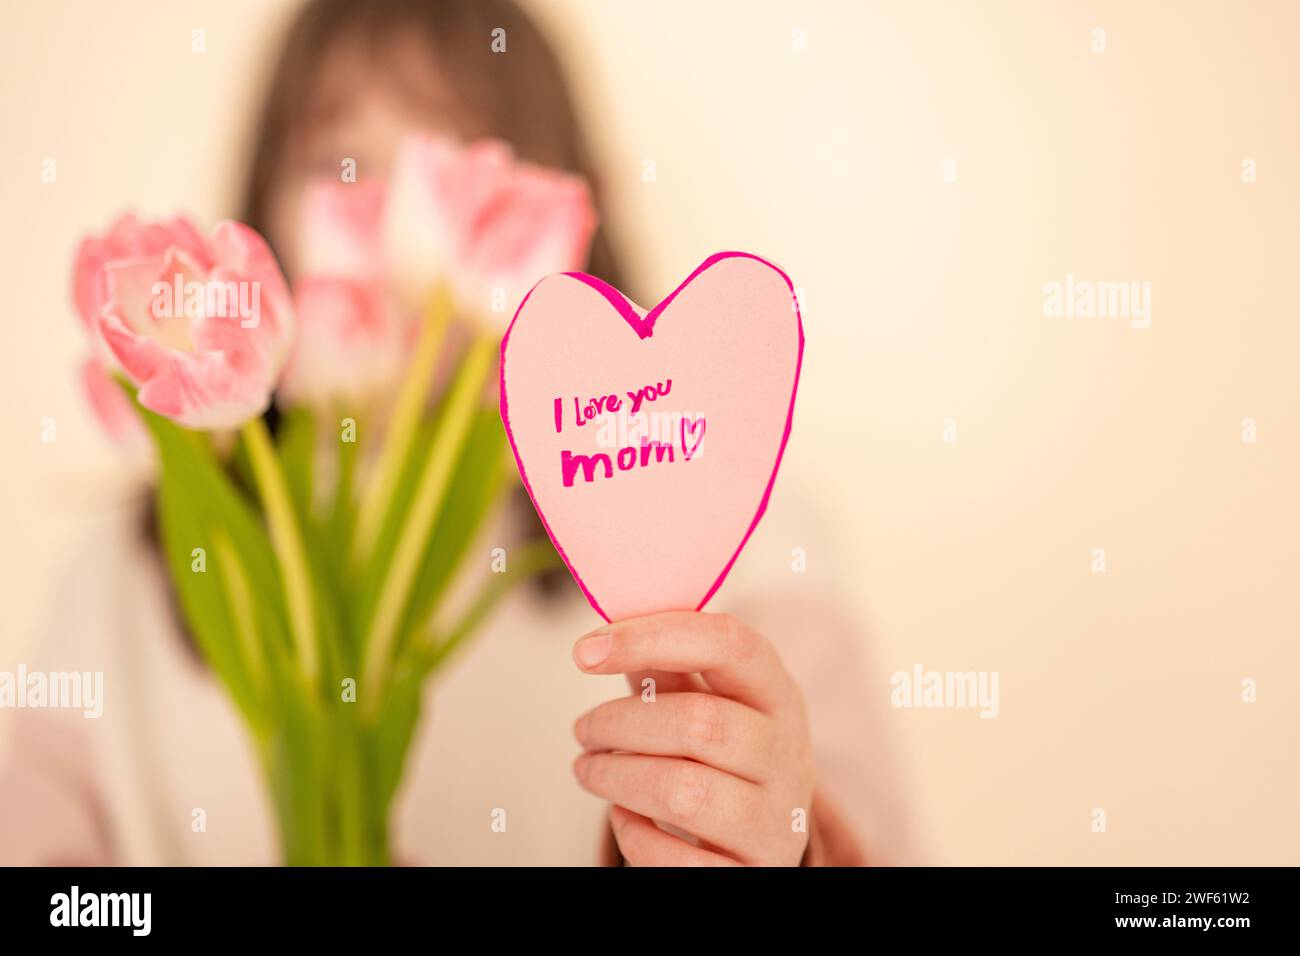 Mothers Day. girl with tulips and heart card.Pink heart card and pink tulips close-up in the hands of a girl.moms day  Stock Photo